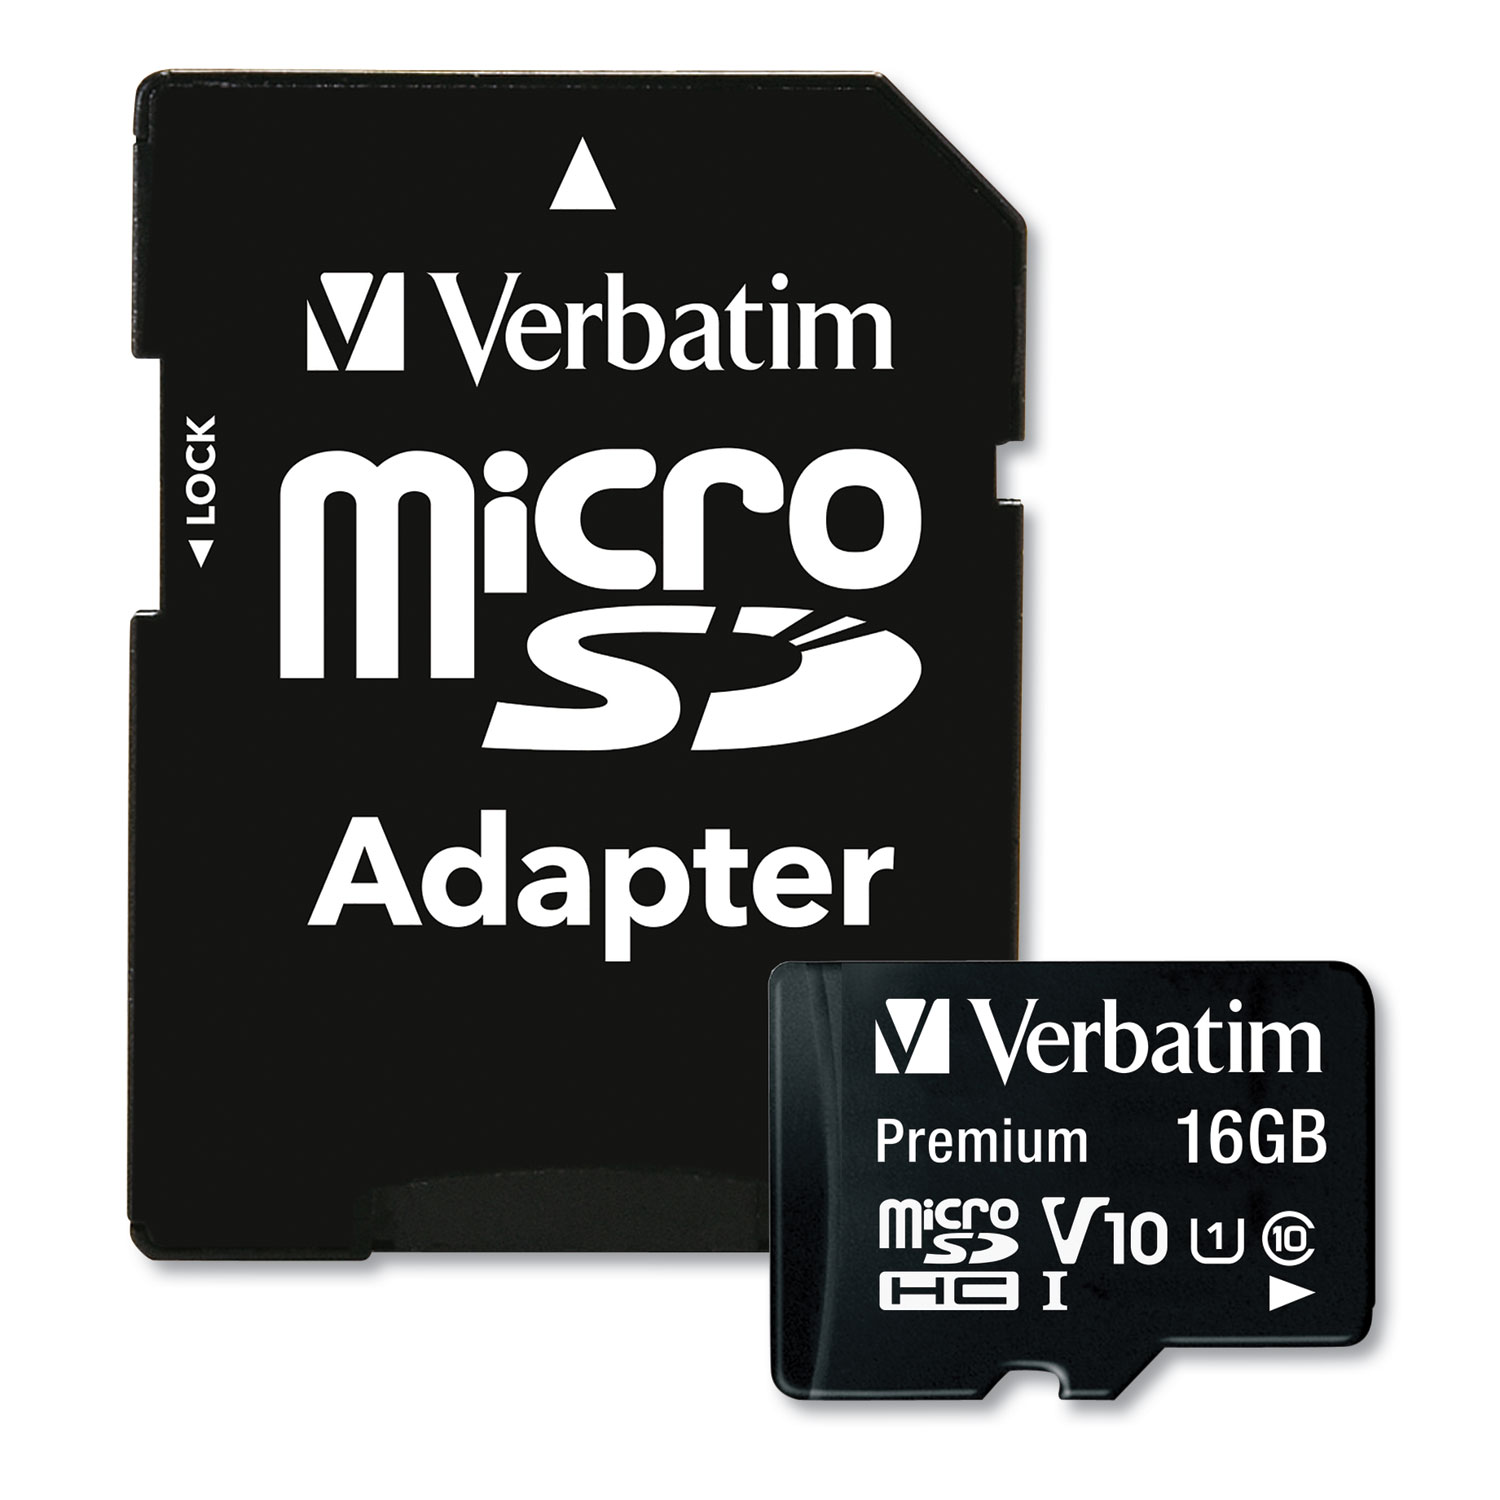  Verbatim 44082 16GB Premium microSDHC Memory Card with Adapter, Up to 80MB/s Read Speed (VER44082) 